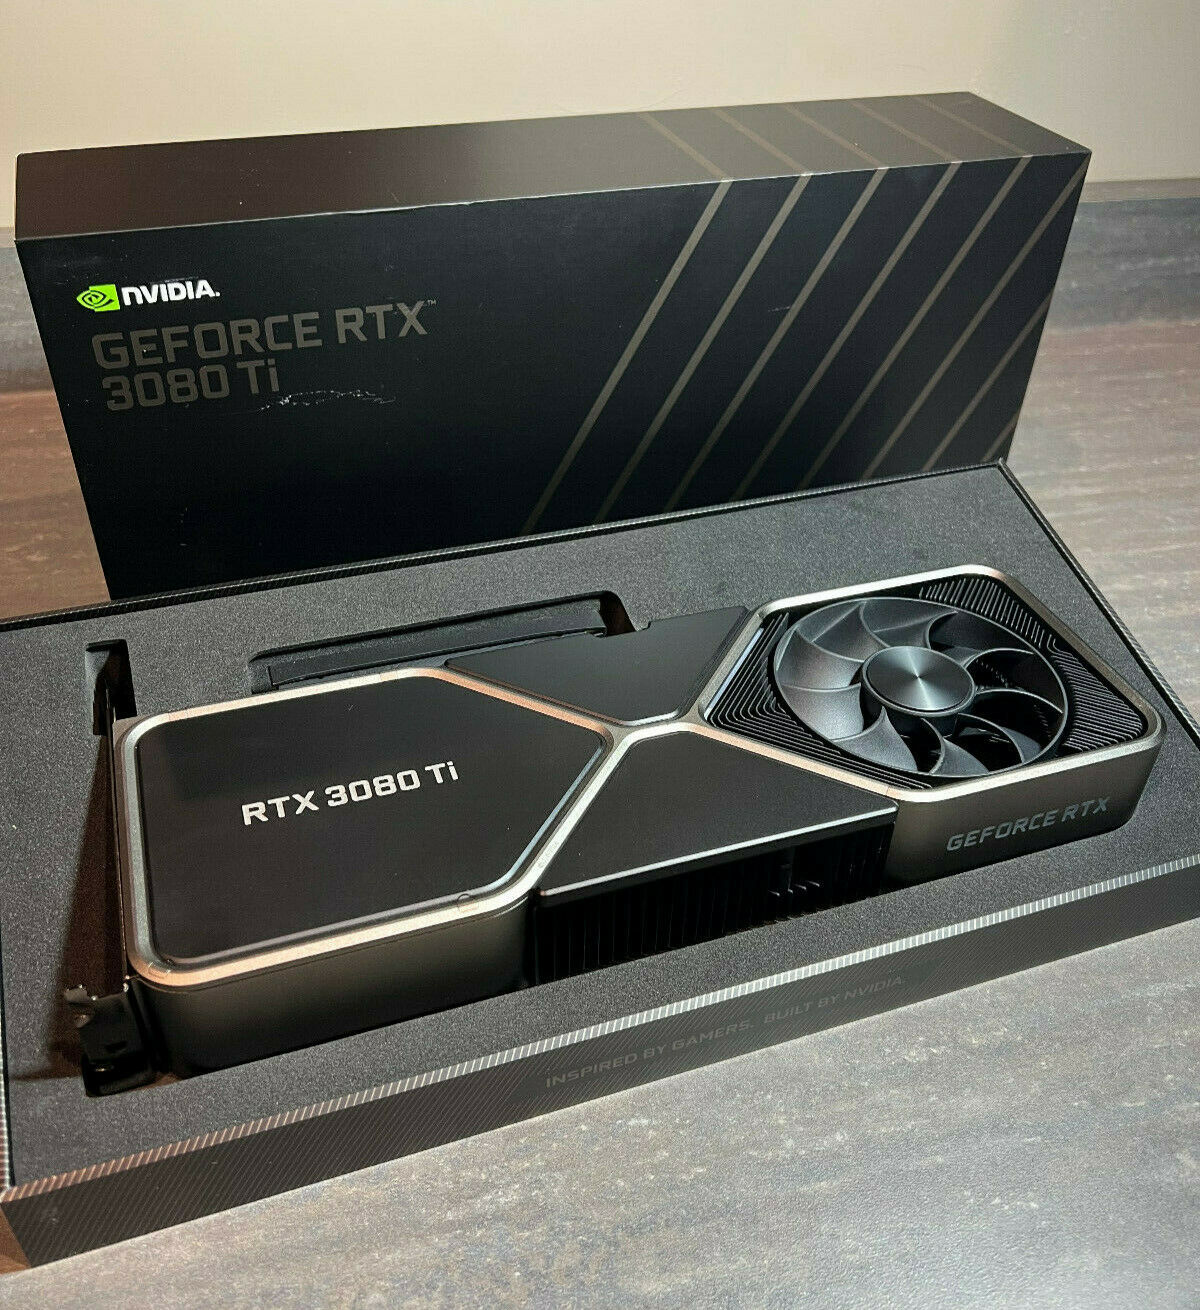 NVIDIA GeForce RTX 3080 Ti Founders Edition 12GB Graphics Card